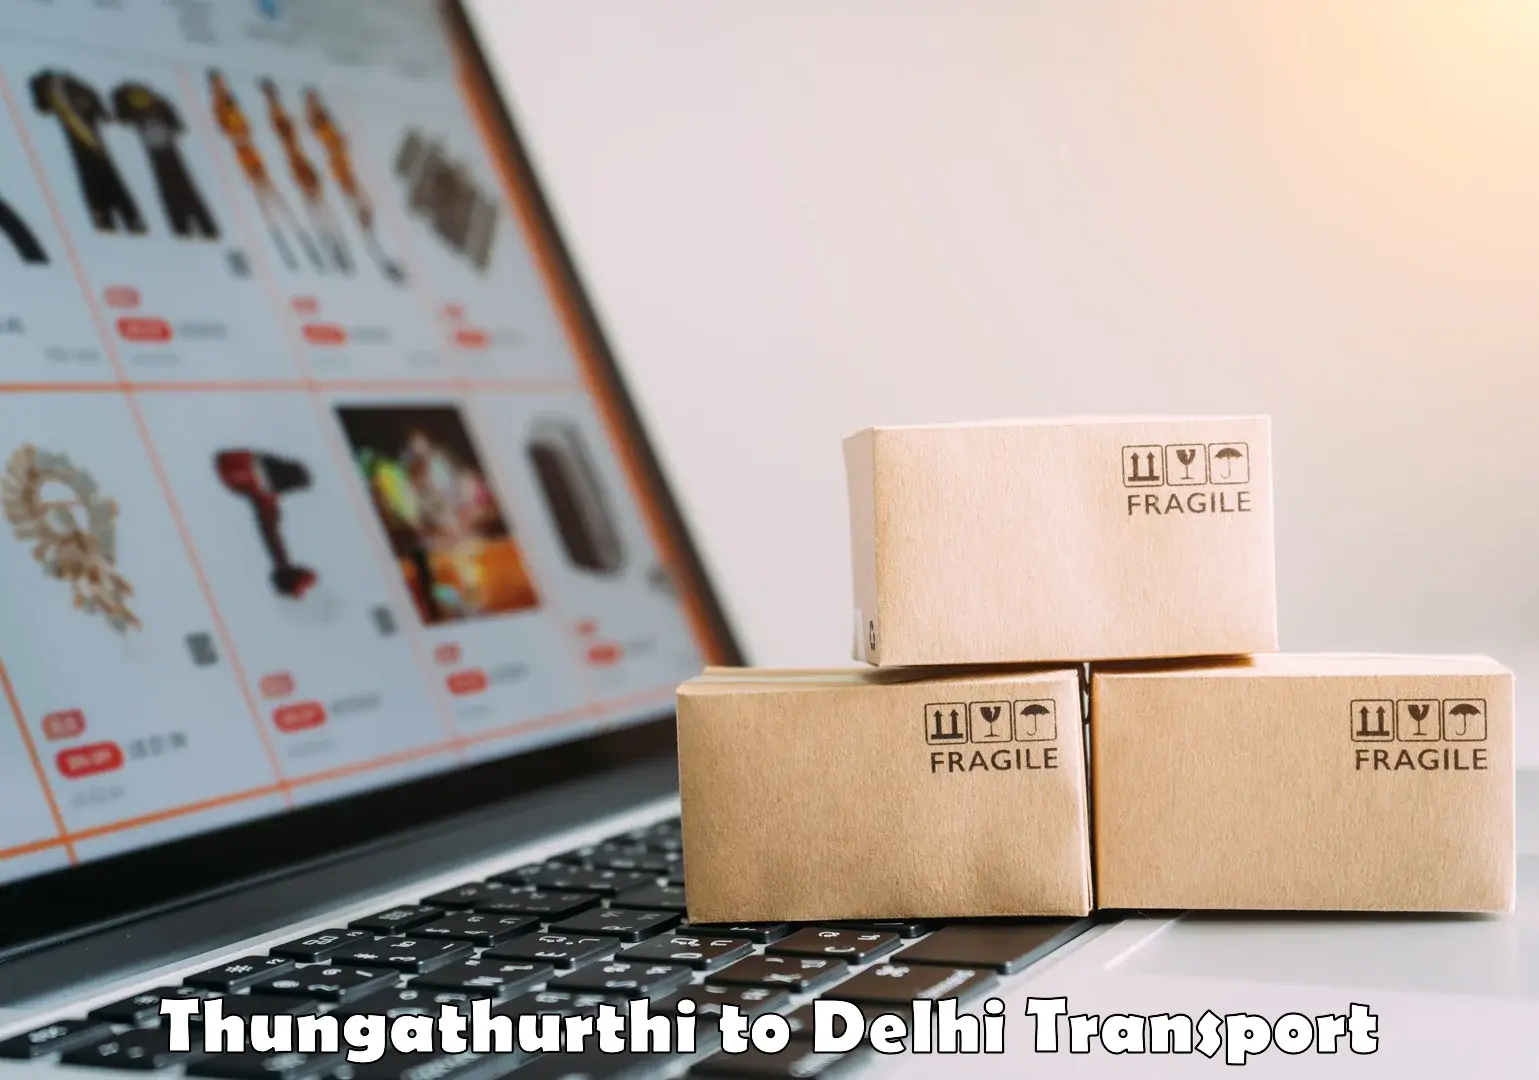 Commercial transport service Thungathurthi to East Delhi